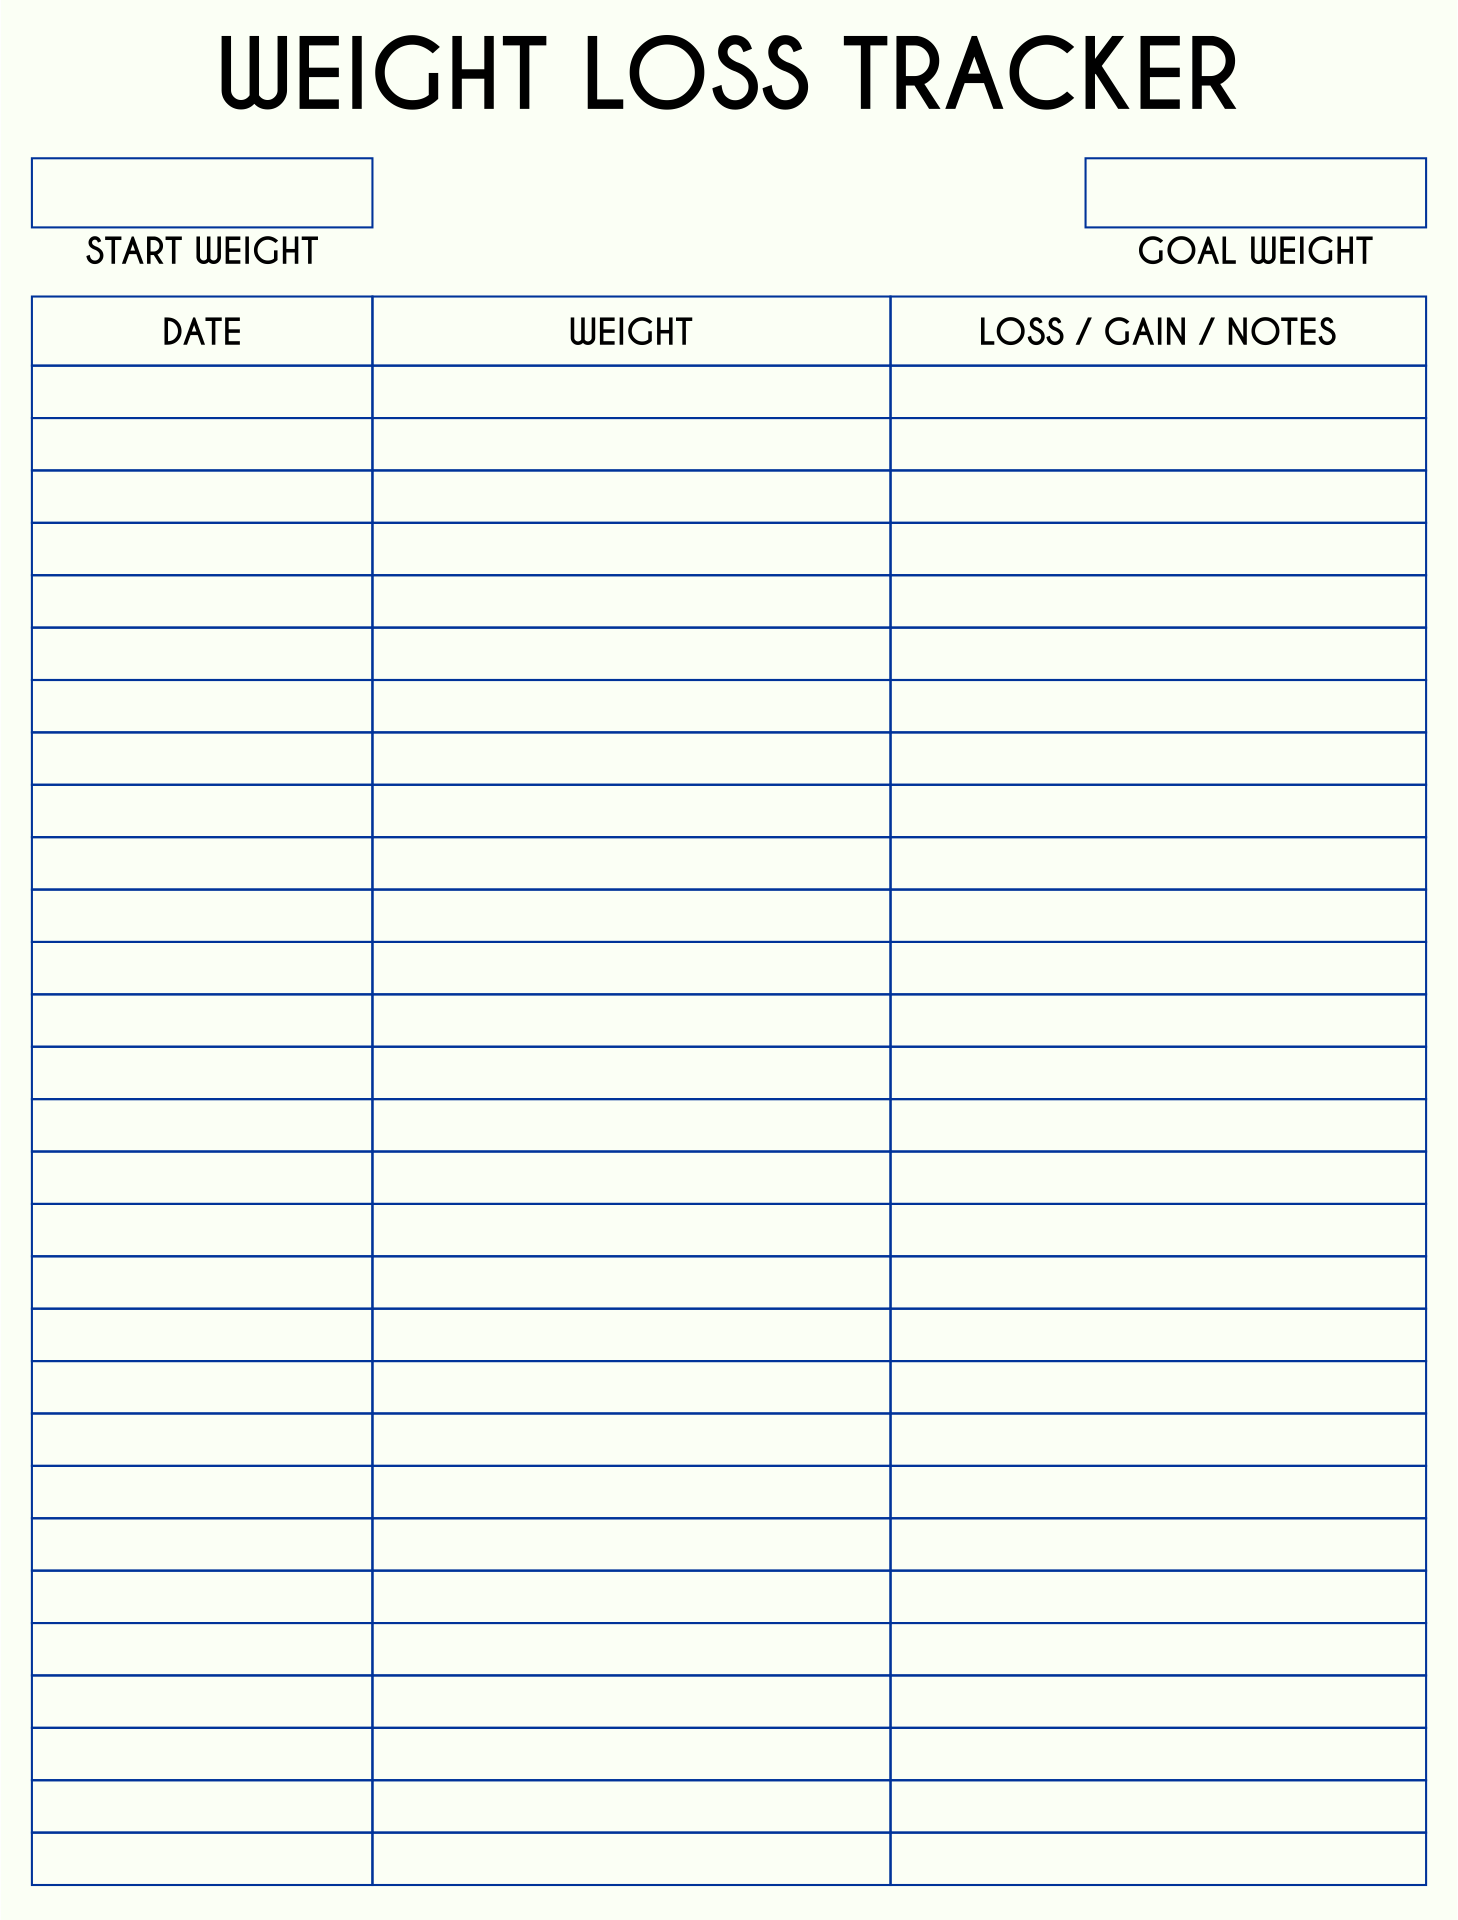 monthly-weight-loss-tracker-printable-printable-world-holiday